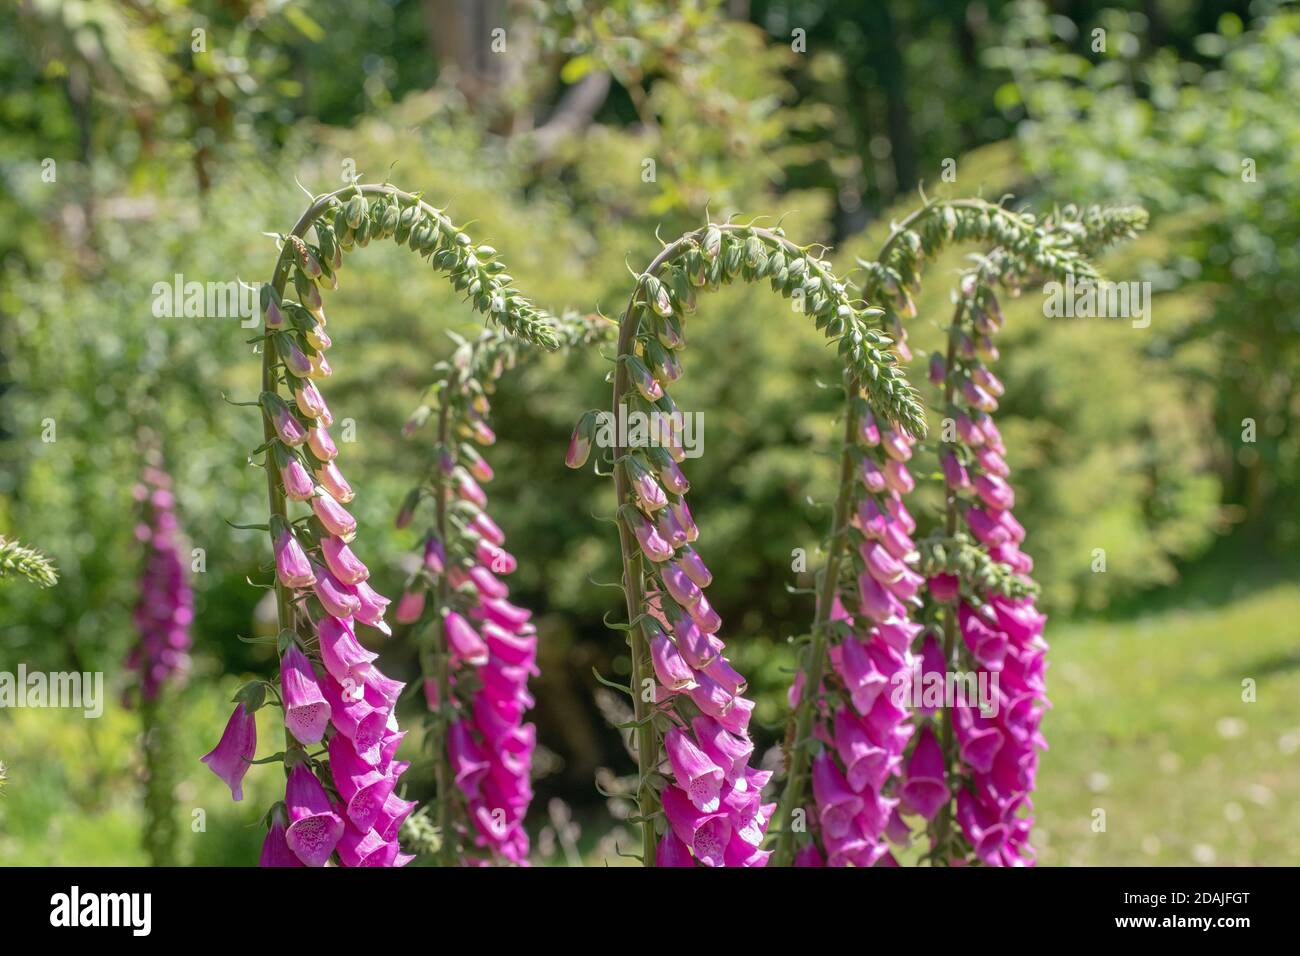 Foxglove (Digitalis purpurea). flower stems. Row of flowering stems, side by side. Top heavy. Wild garden, permitted sown seed. Gardening with nature. Stock Photo